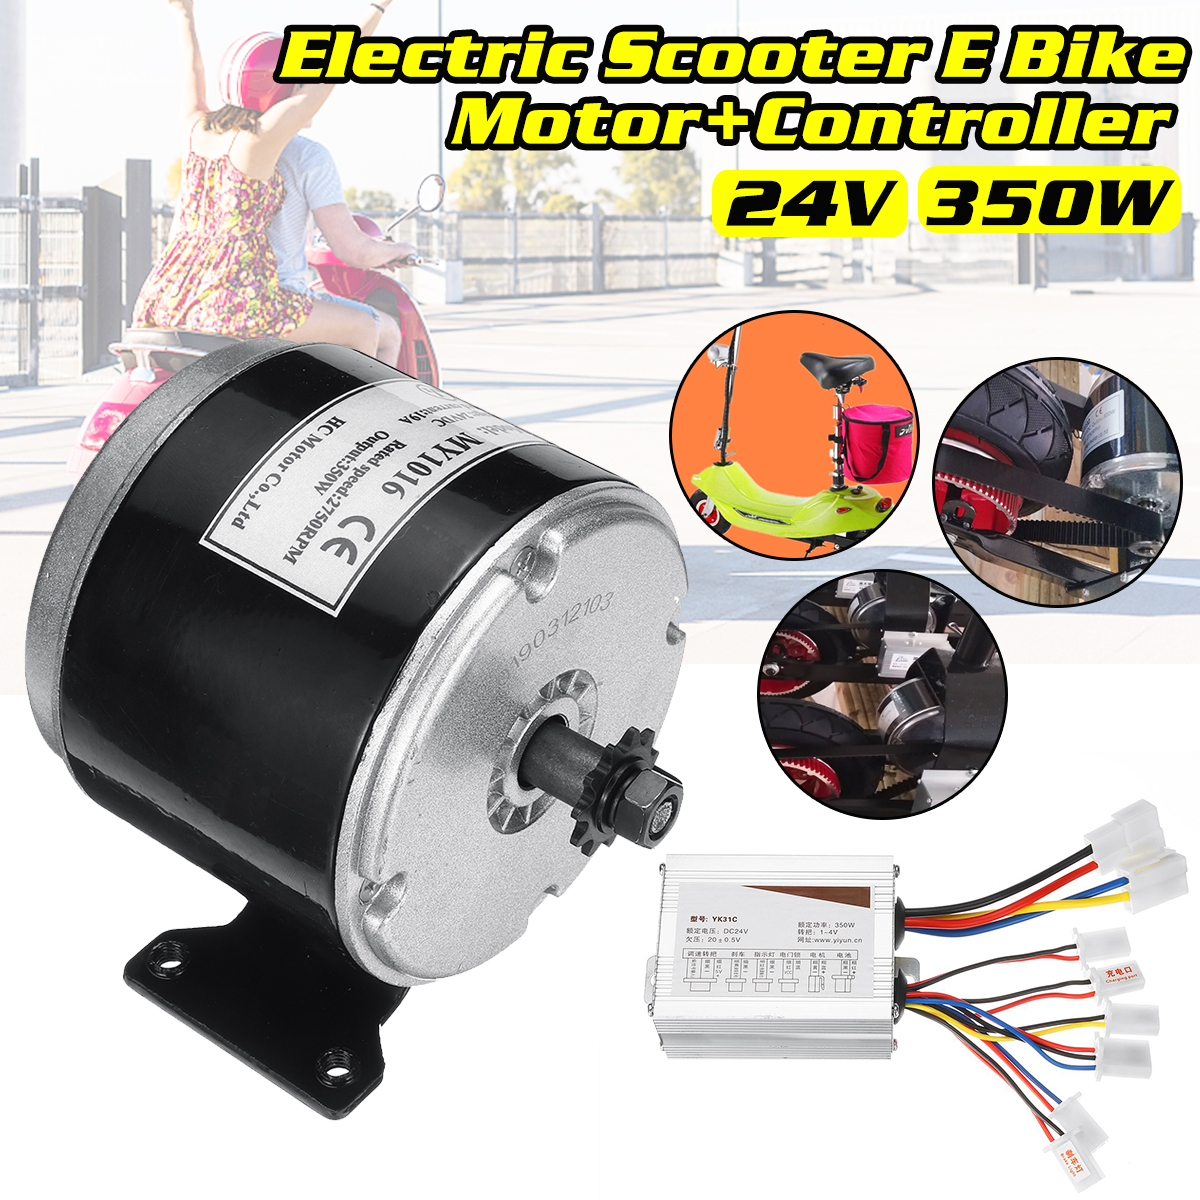 24V-350W-Electric-Scooter-E-Bike-Bicycle-Brushed-Motor-with-Controller-For-25H-Chain-1509223-1